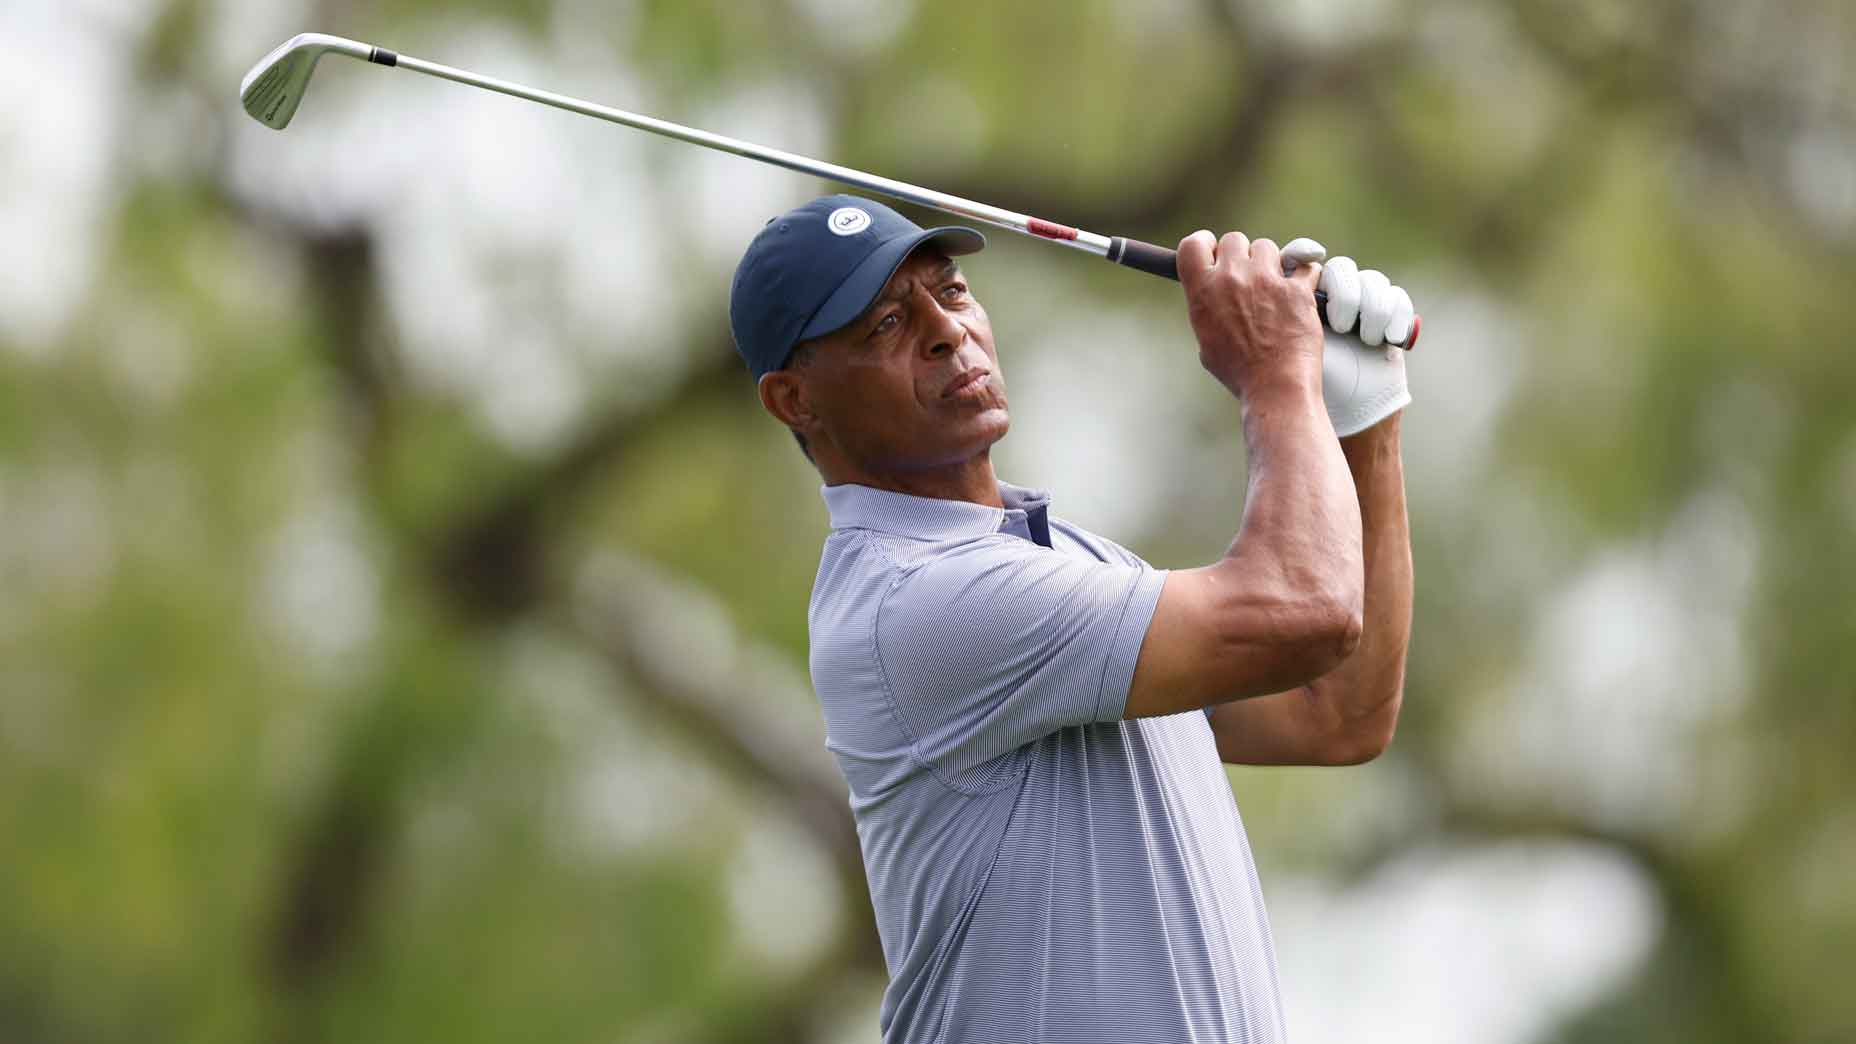 Former NFL player Marcus Allen tees off on the 11th hole during the second round of the Invited Celebrity Classic at Las Colinas Country Club on April 22, 2023 in Irving, Texas.